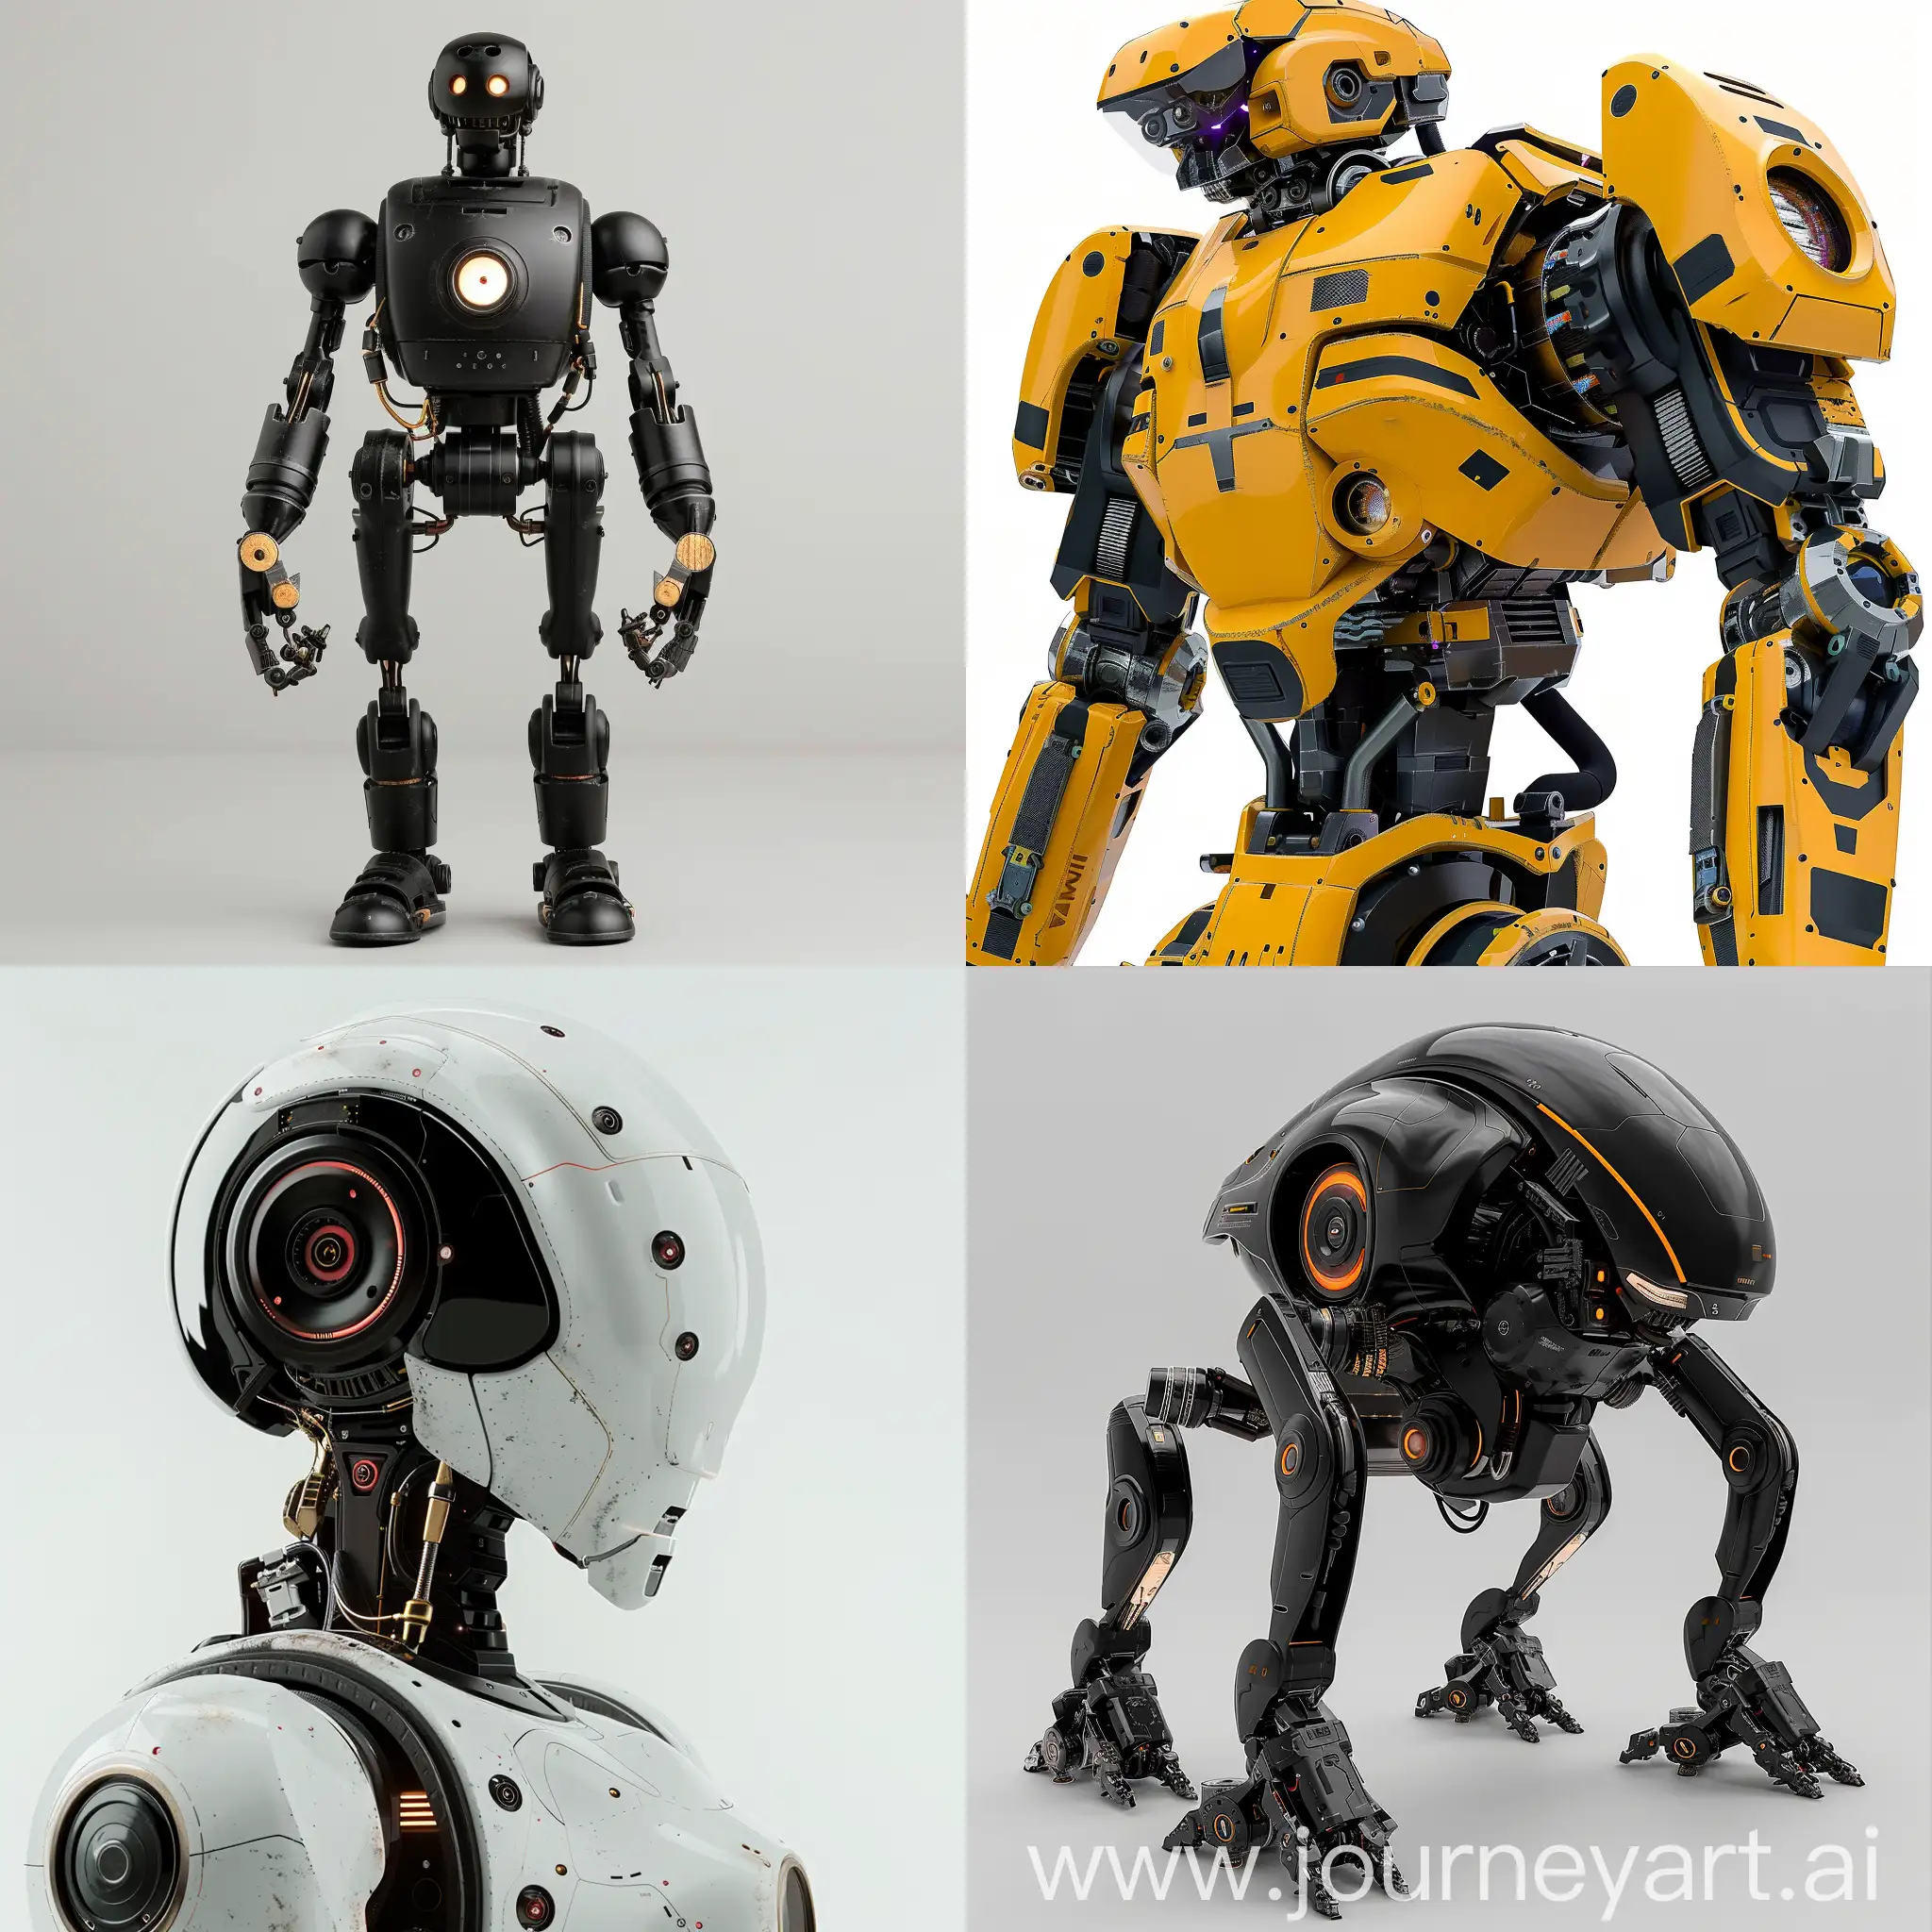 Futuristic-Robot-Model-6-with-11-Aspect-Ratio-in-a-HighTech-Environment